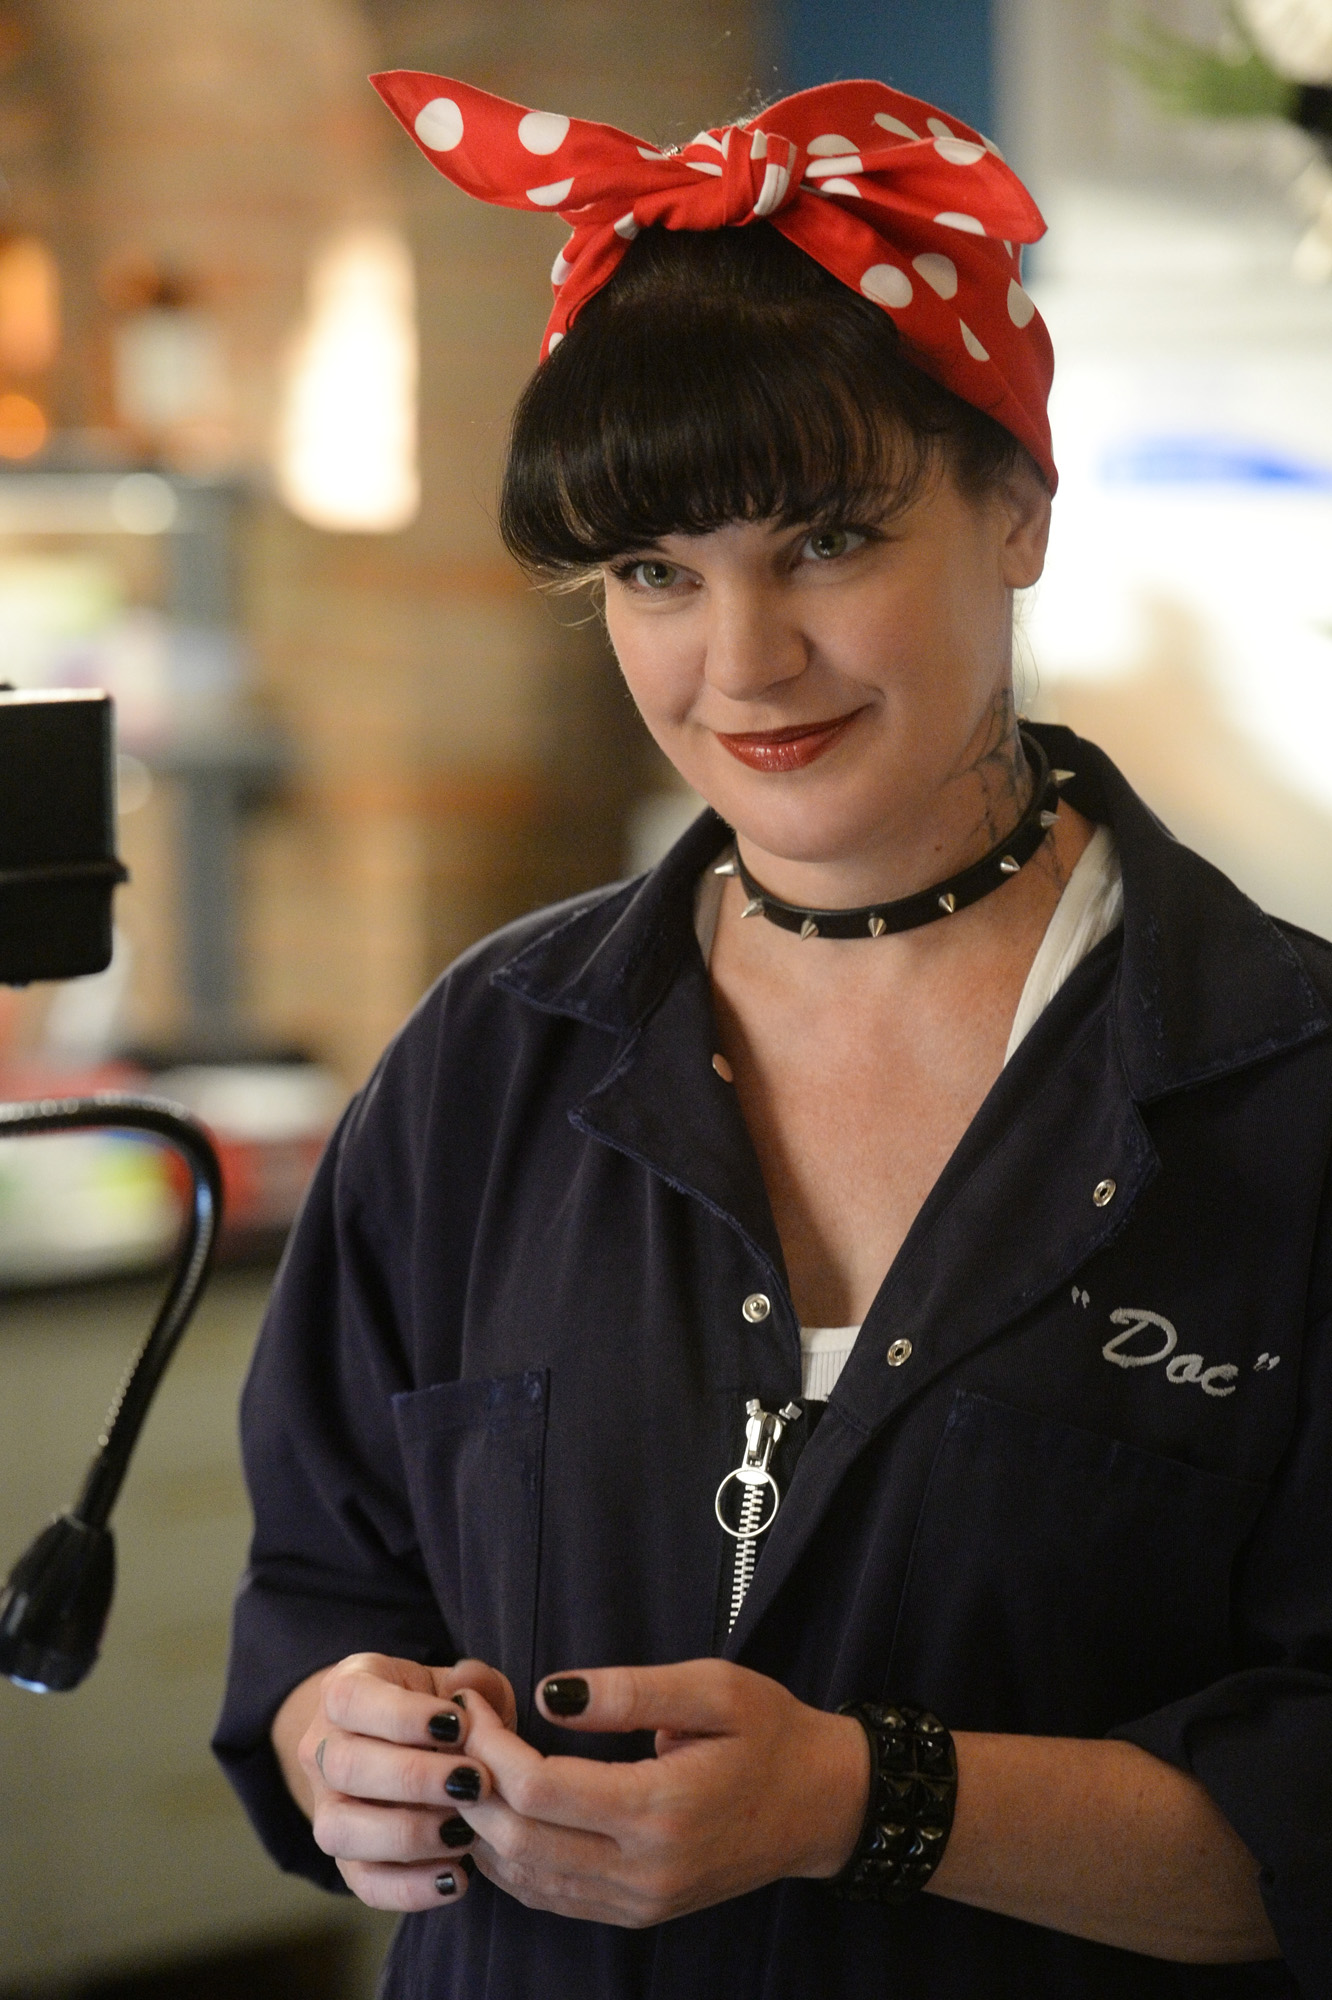 Pauley Perrette as Abby Sciuto on "NCIS" in Los Angeles, California, on October 7, 2015 | Source: Getty Images